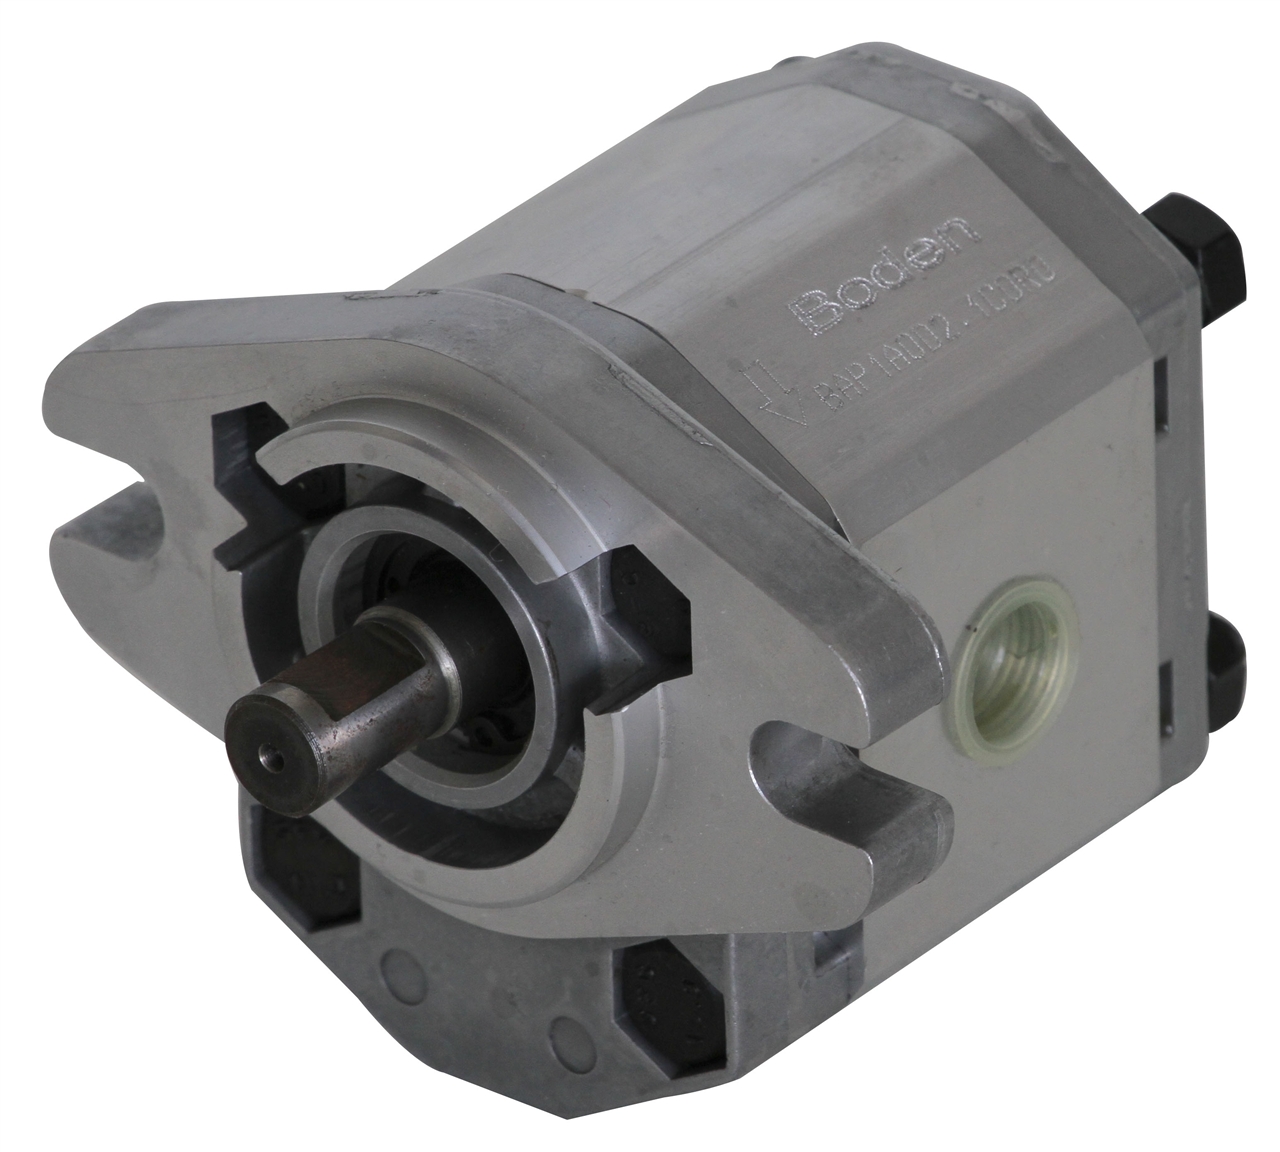 Product- China Boden Hydraulics Co., Ltd